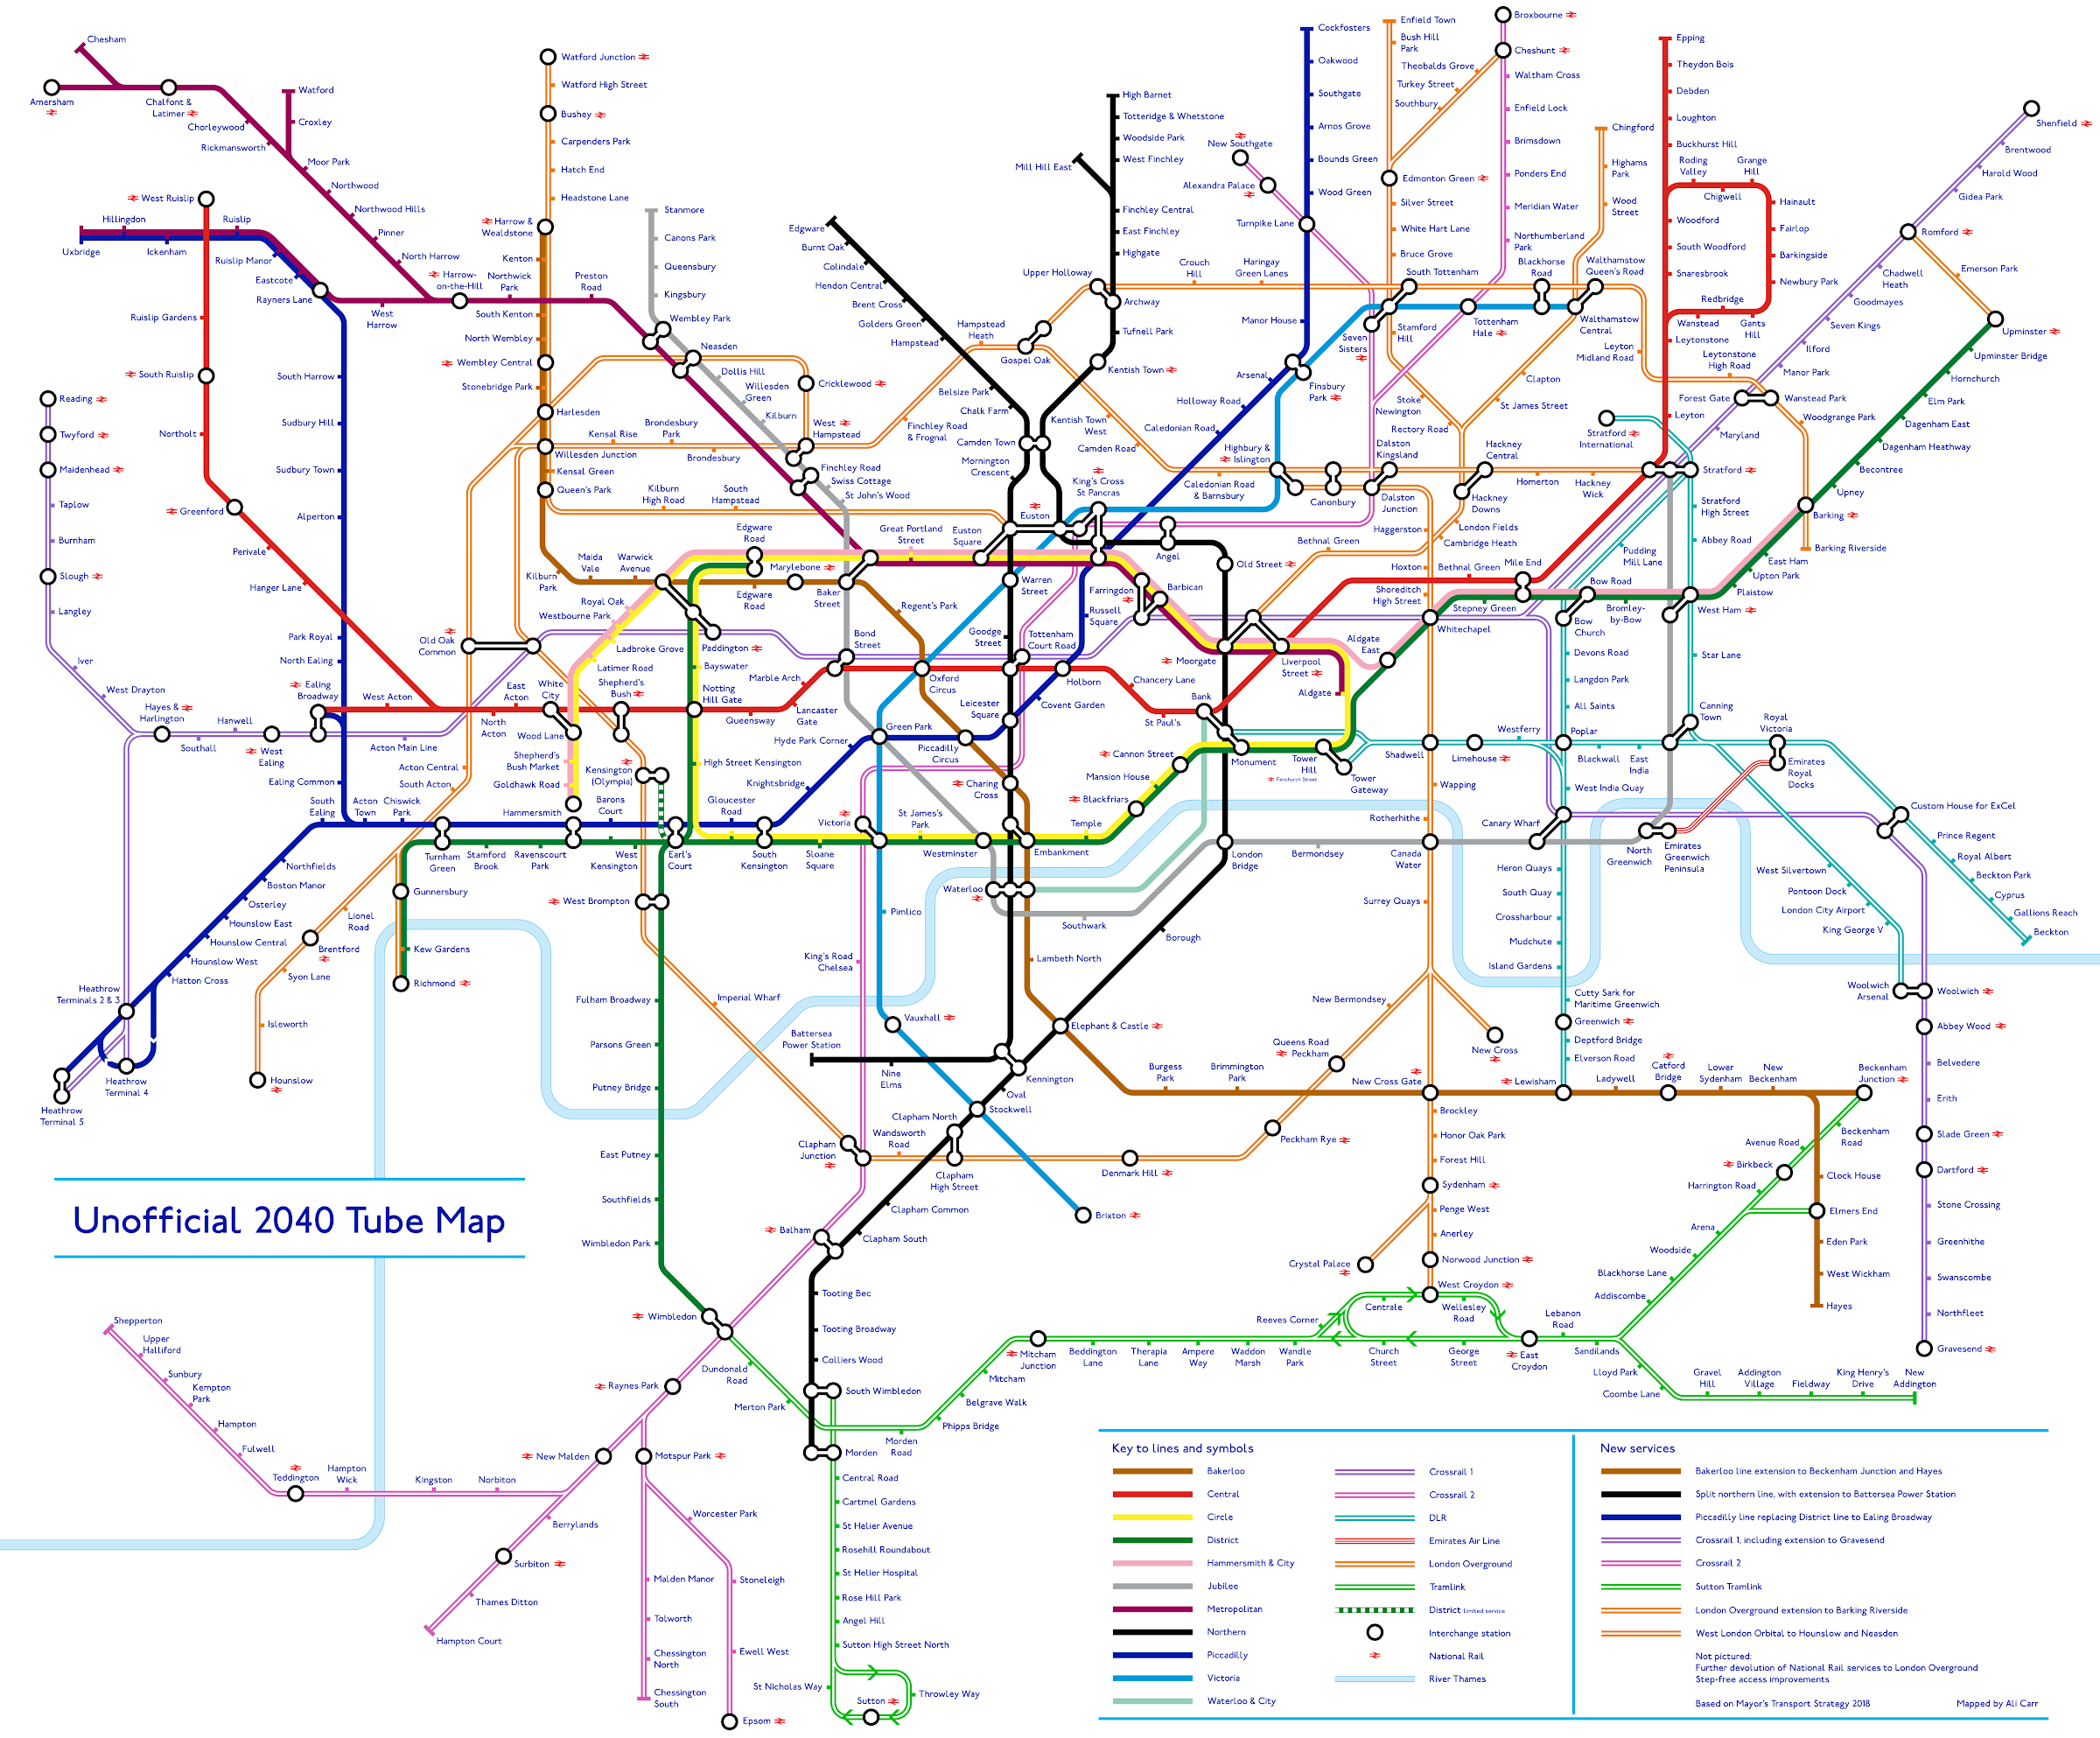 This Is What The Tube Map Could Look Like In 2040 | Londonist